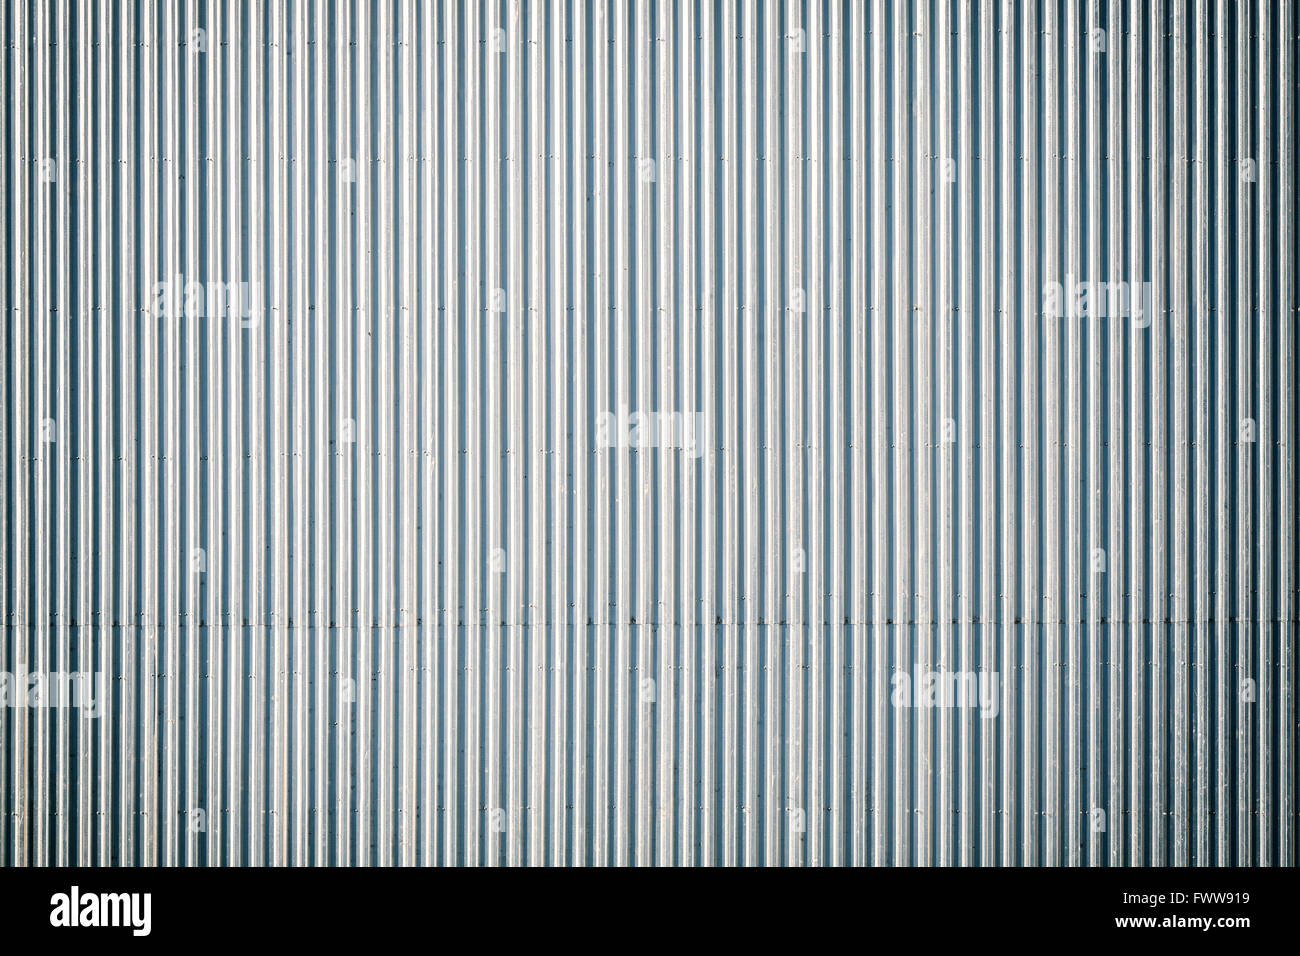 Vintage toned corrugated metal roof, picture taken from above, industrial background or texture. Stock Photo